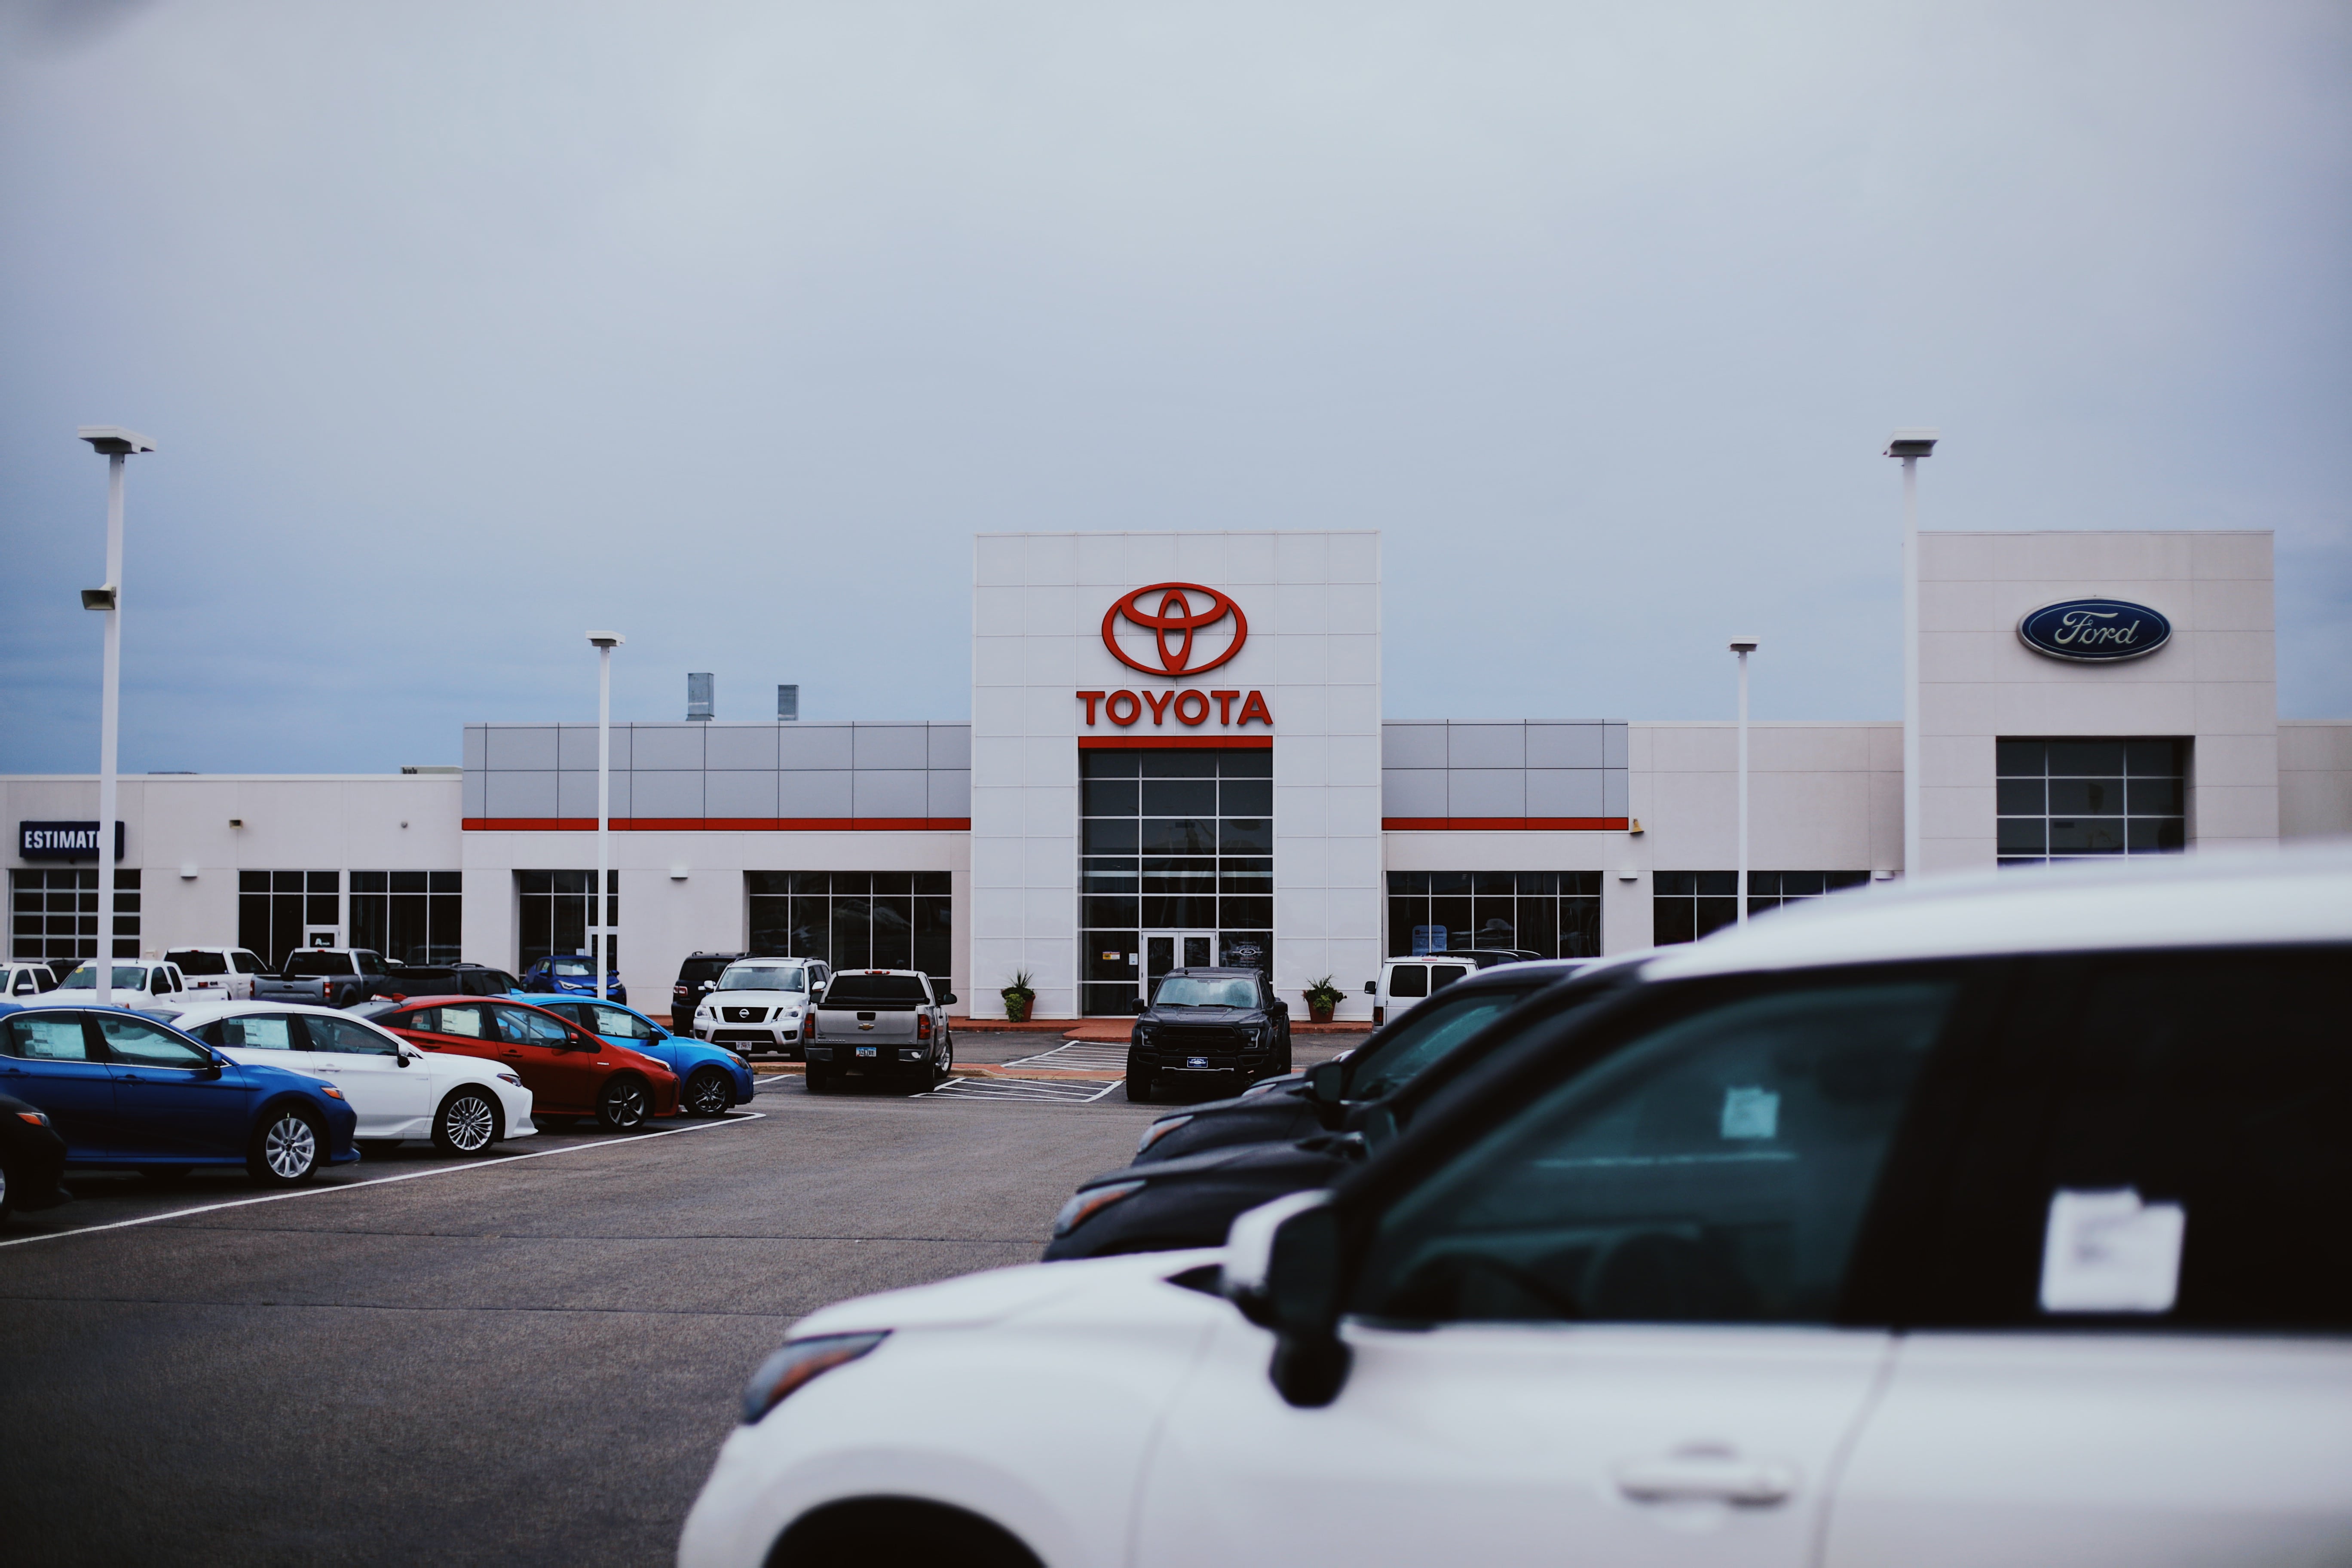 Preowned cars at our Fort Dodge, IA dealership